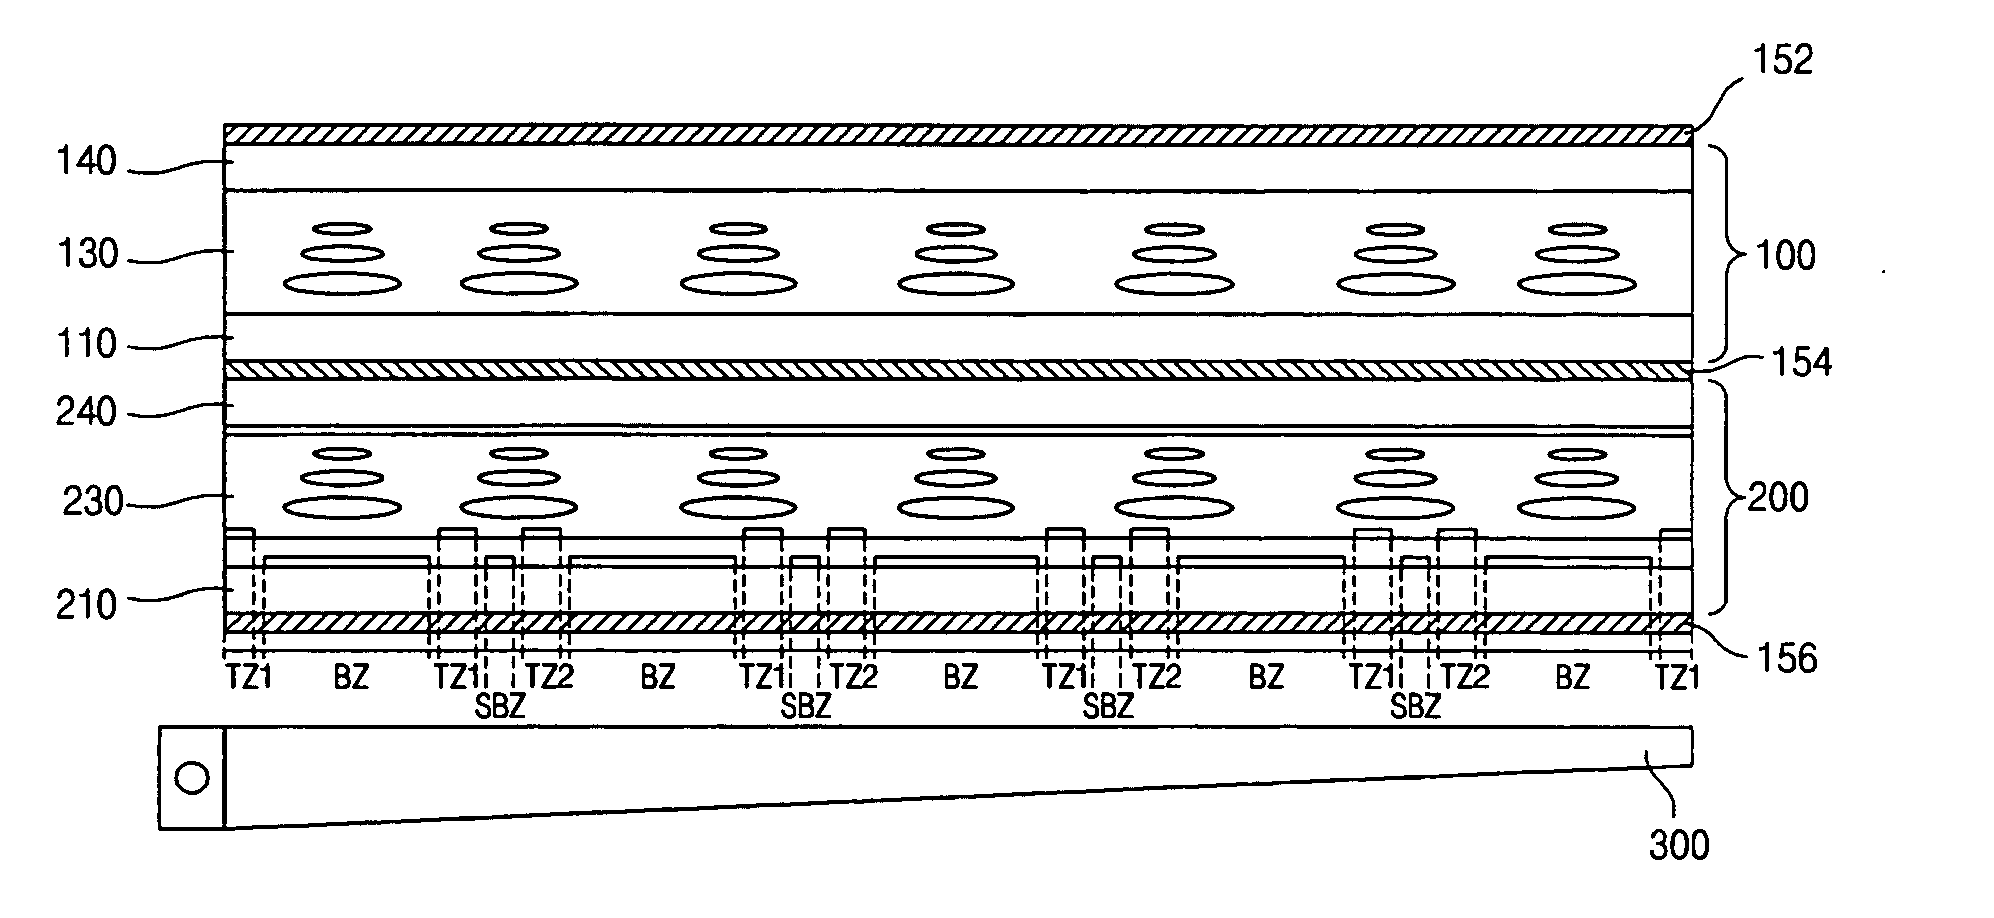 Parallax barrier liquid crystal panel for stereoscopic display device and fabrication method thereof